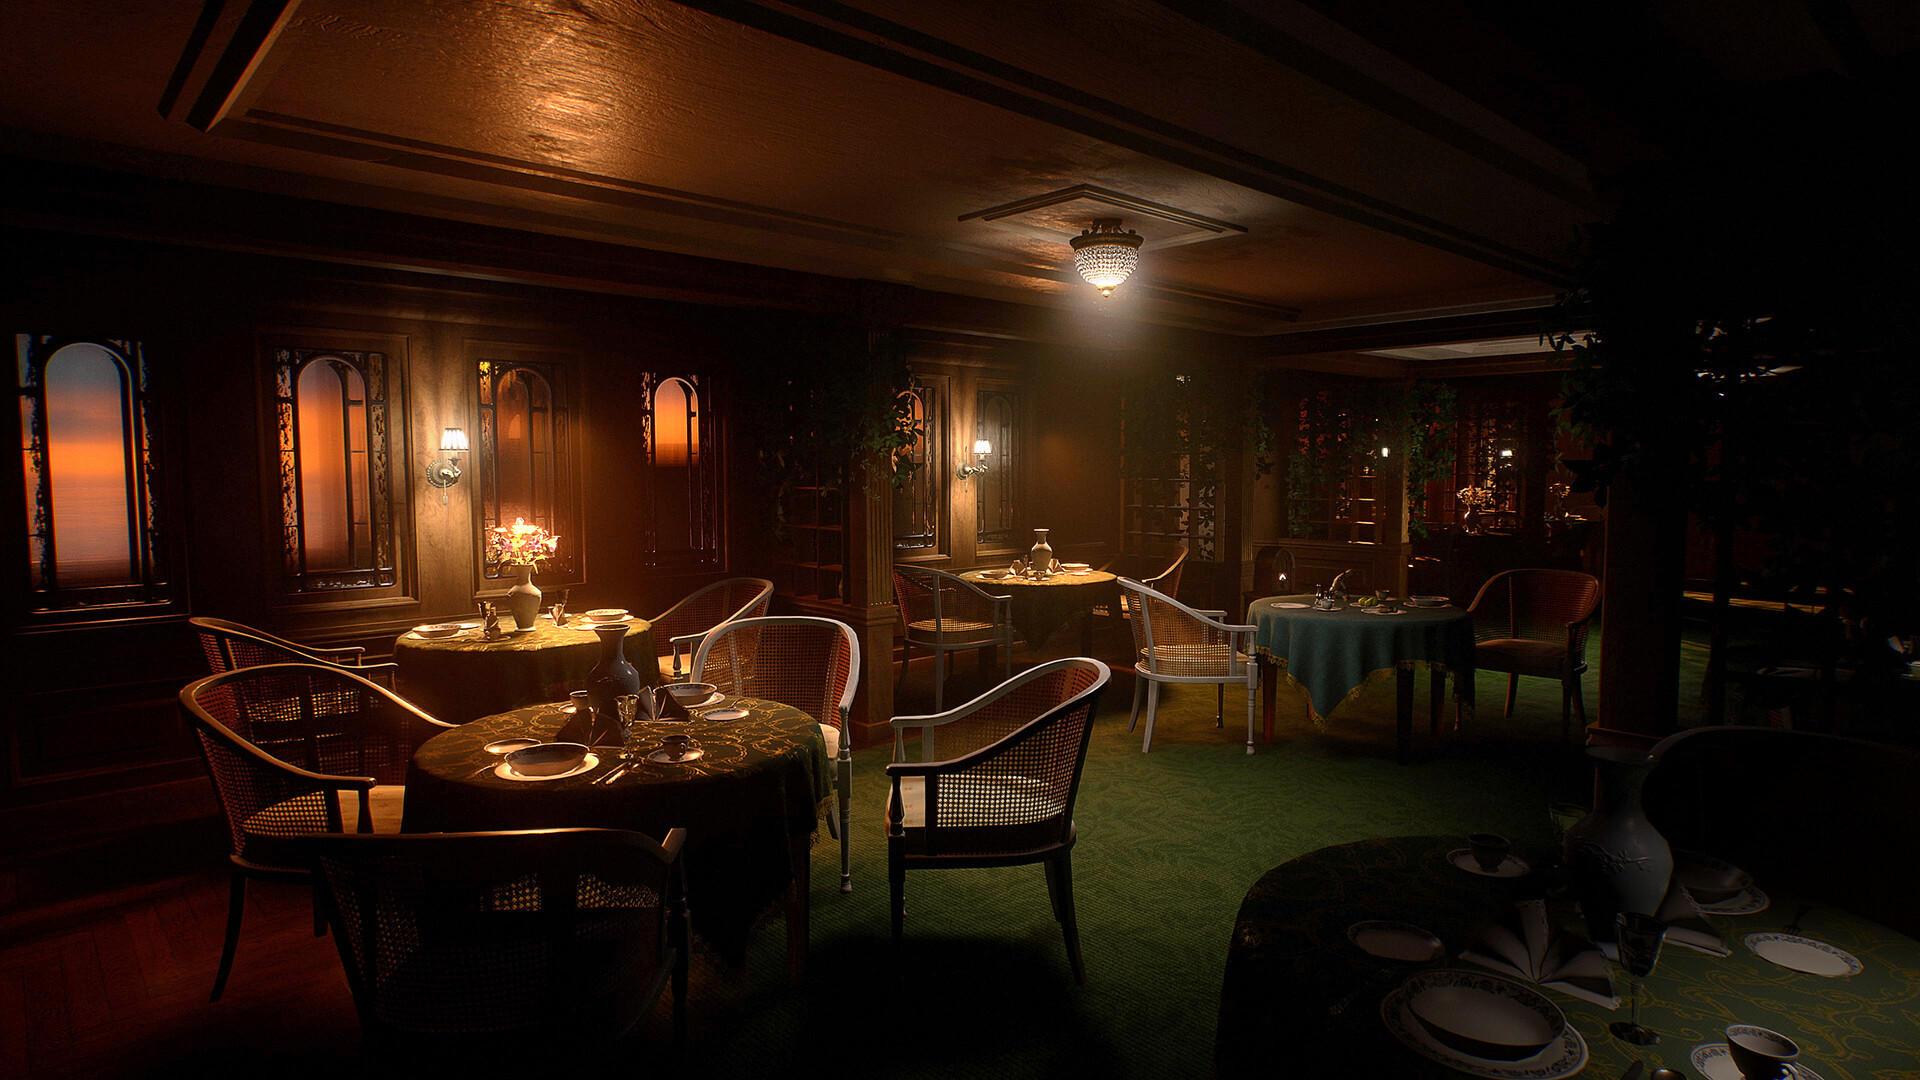 Layers of Fear screenshot game